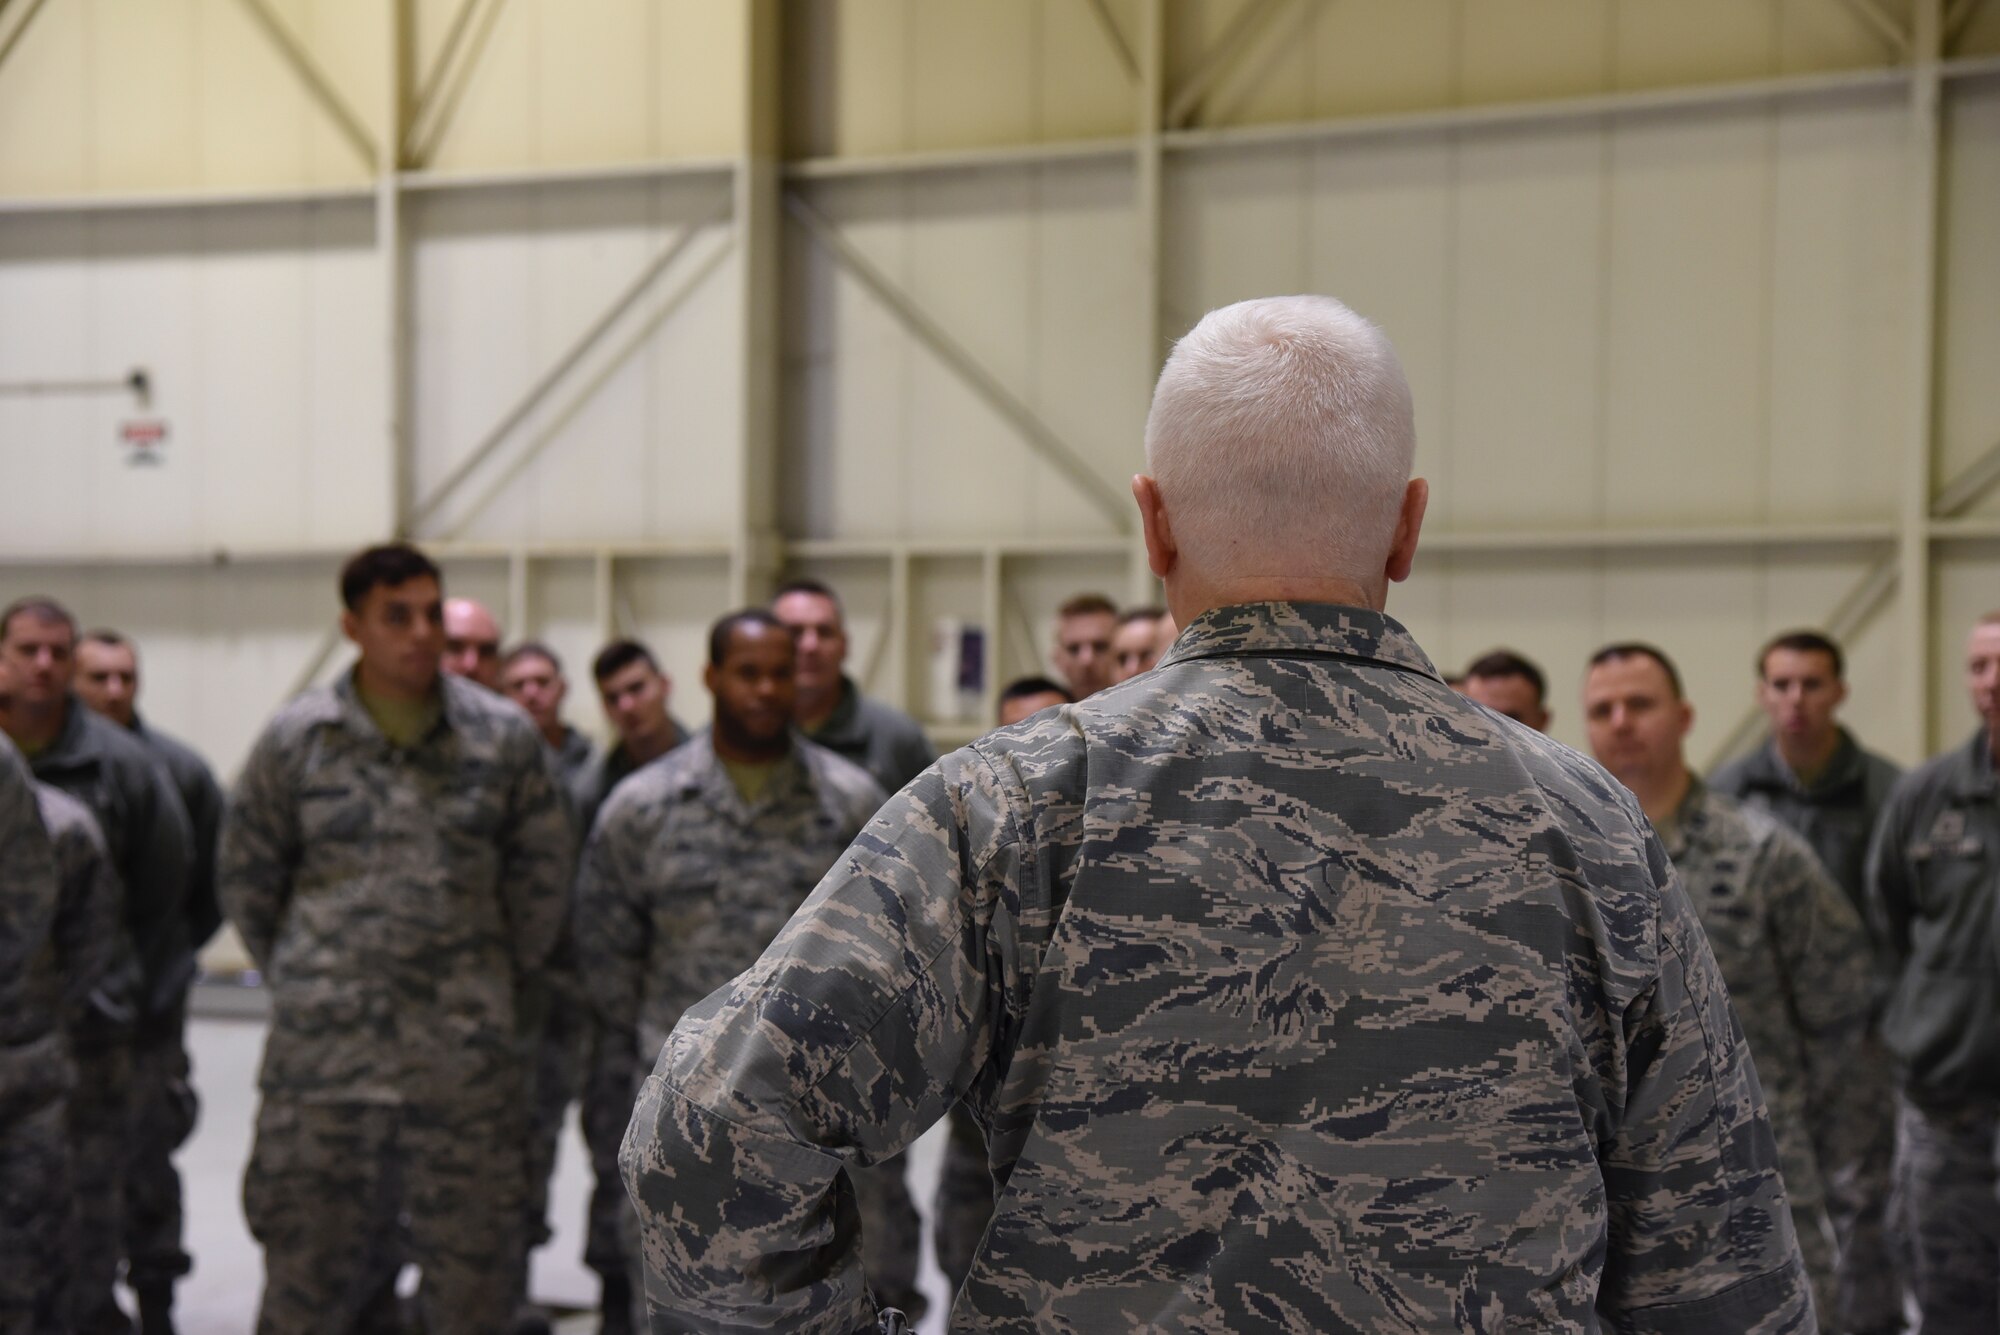 Lt. Gen. L. Scott Rice, the Director of the Air National Guard speaks to 175th Wing airmen February 10, 2018 while touring Warfield Air National Guard Base, Middle River, Md.